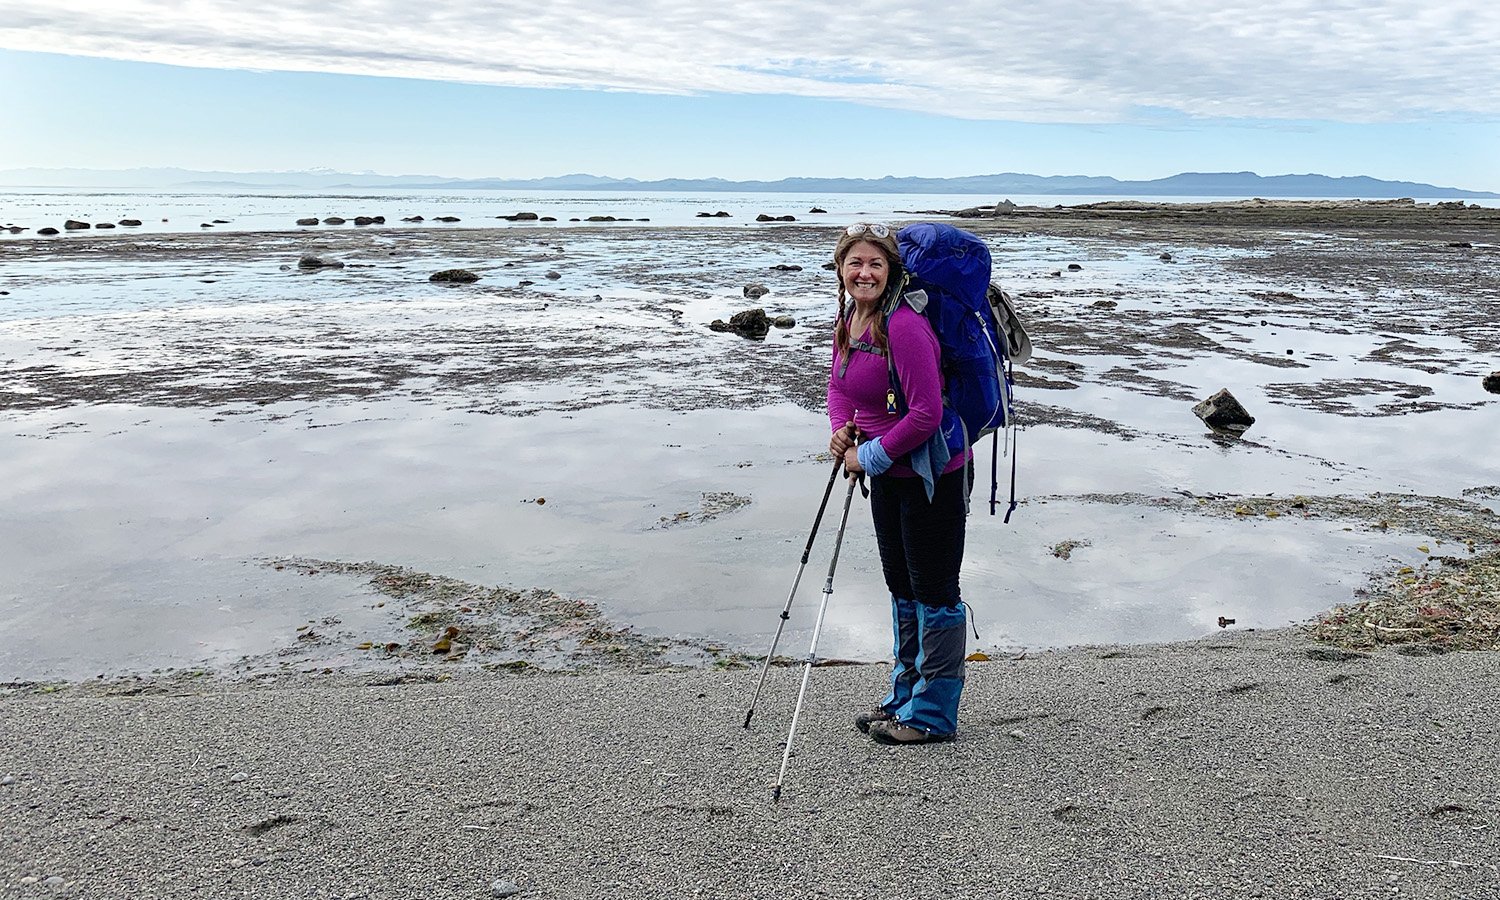 Woman walking by the ocean carrying hiking pack